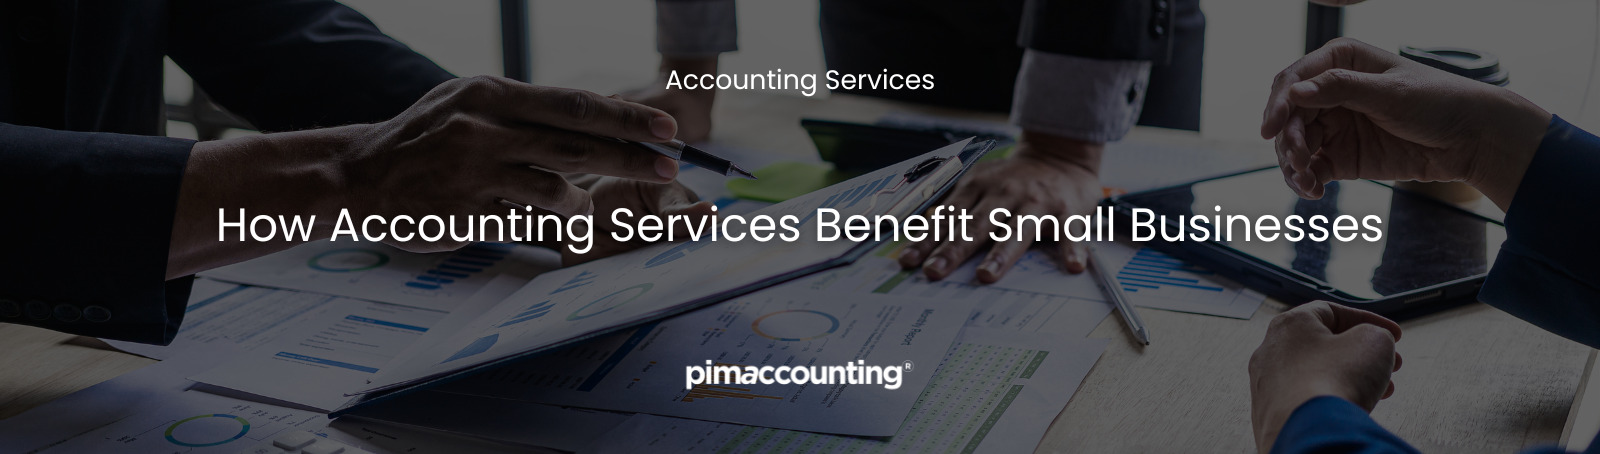 How Accounting Services Benefit Small Businesses